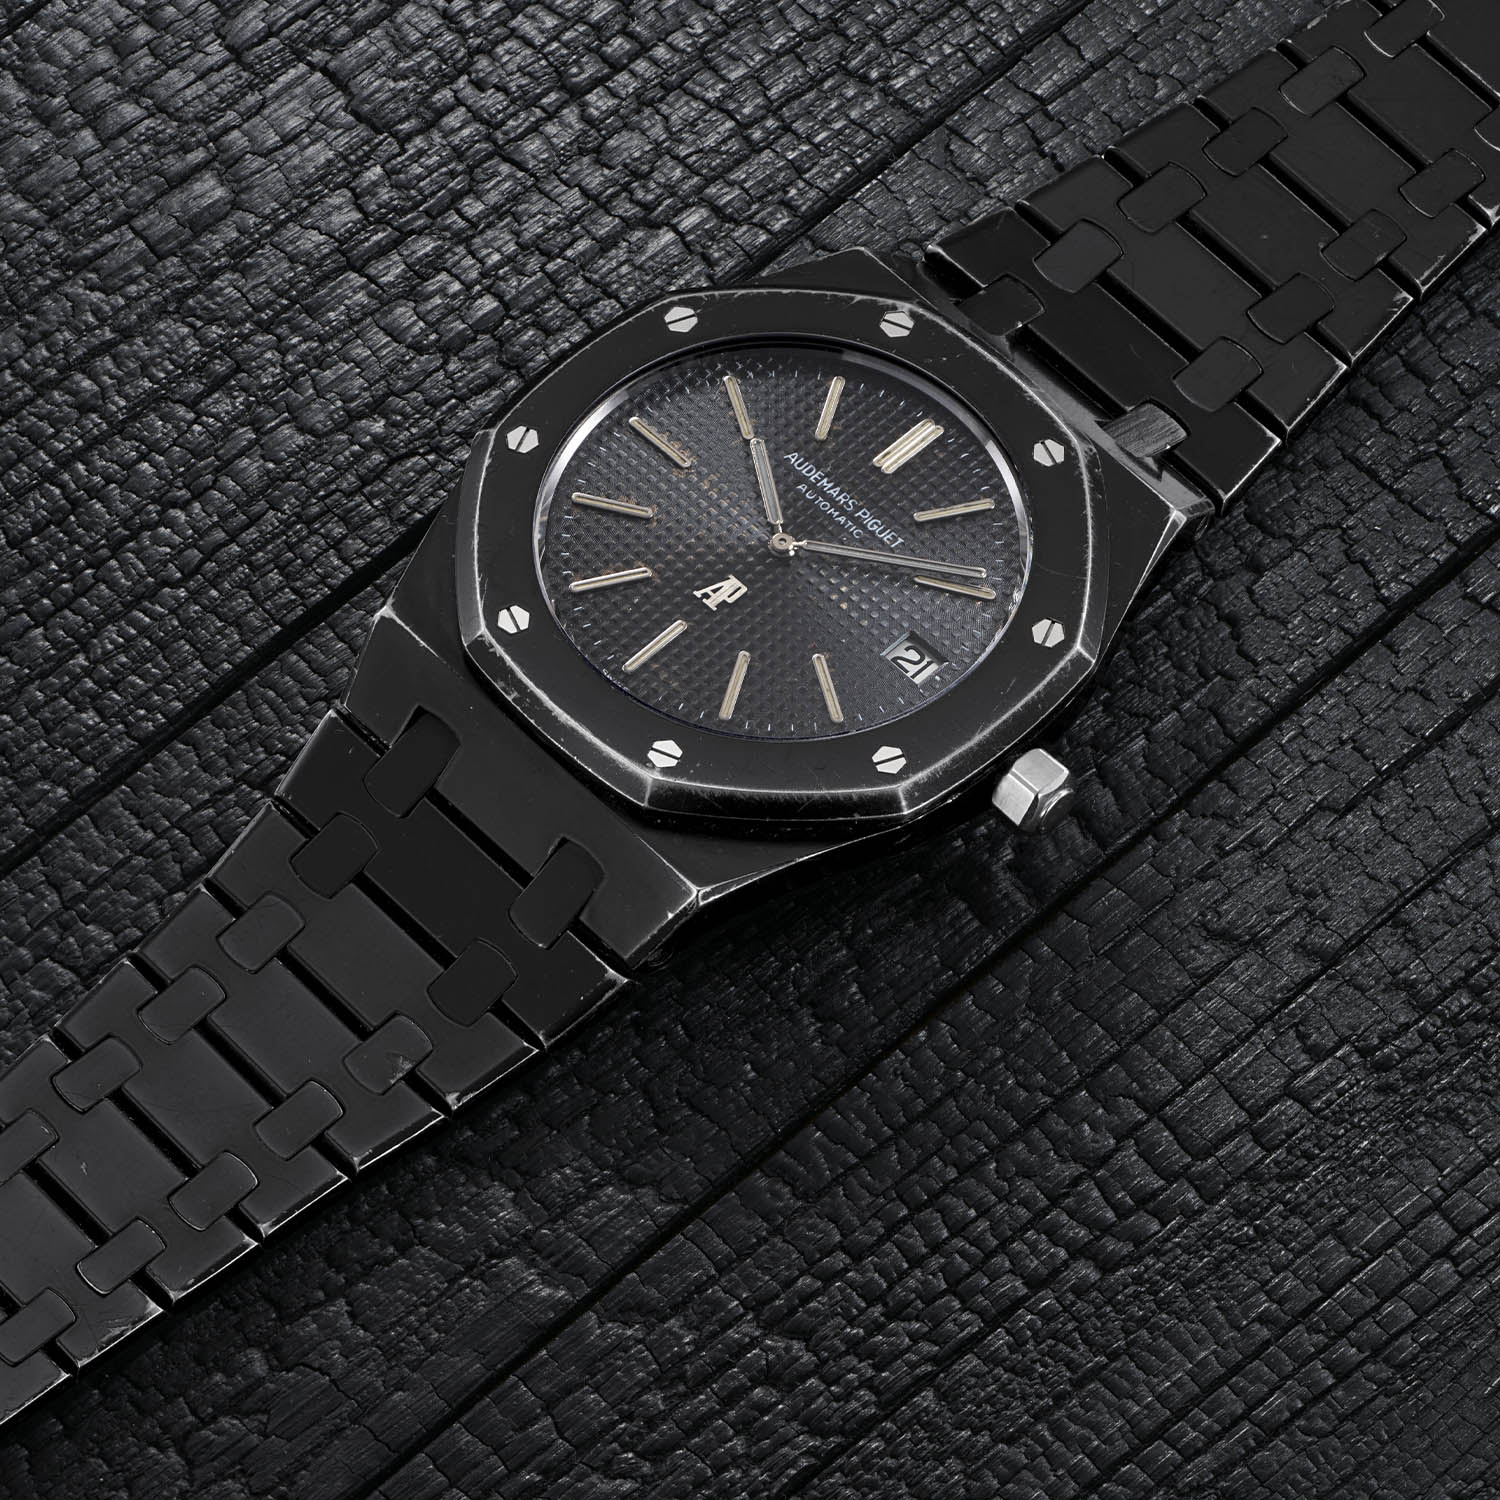 Phillips The Royal Oak 50th Auction - 5402ST Karl Lagerfeld Black PVD coated